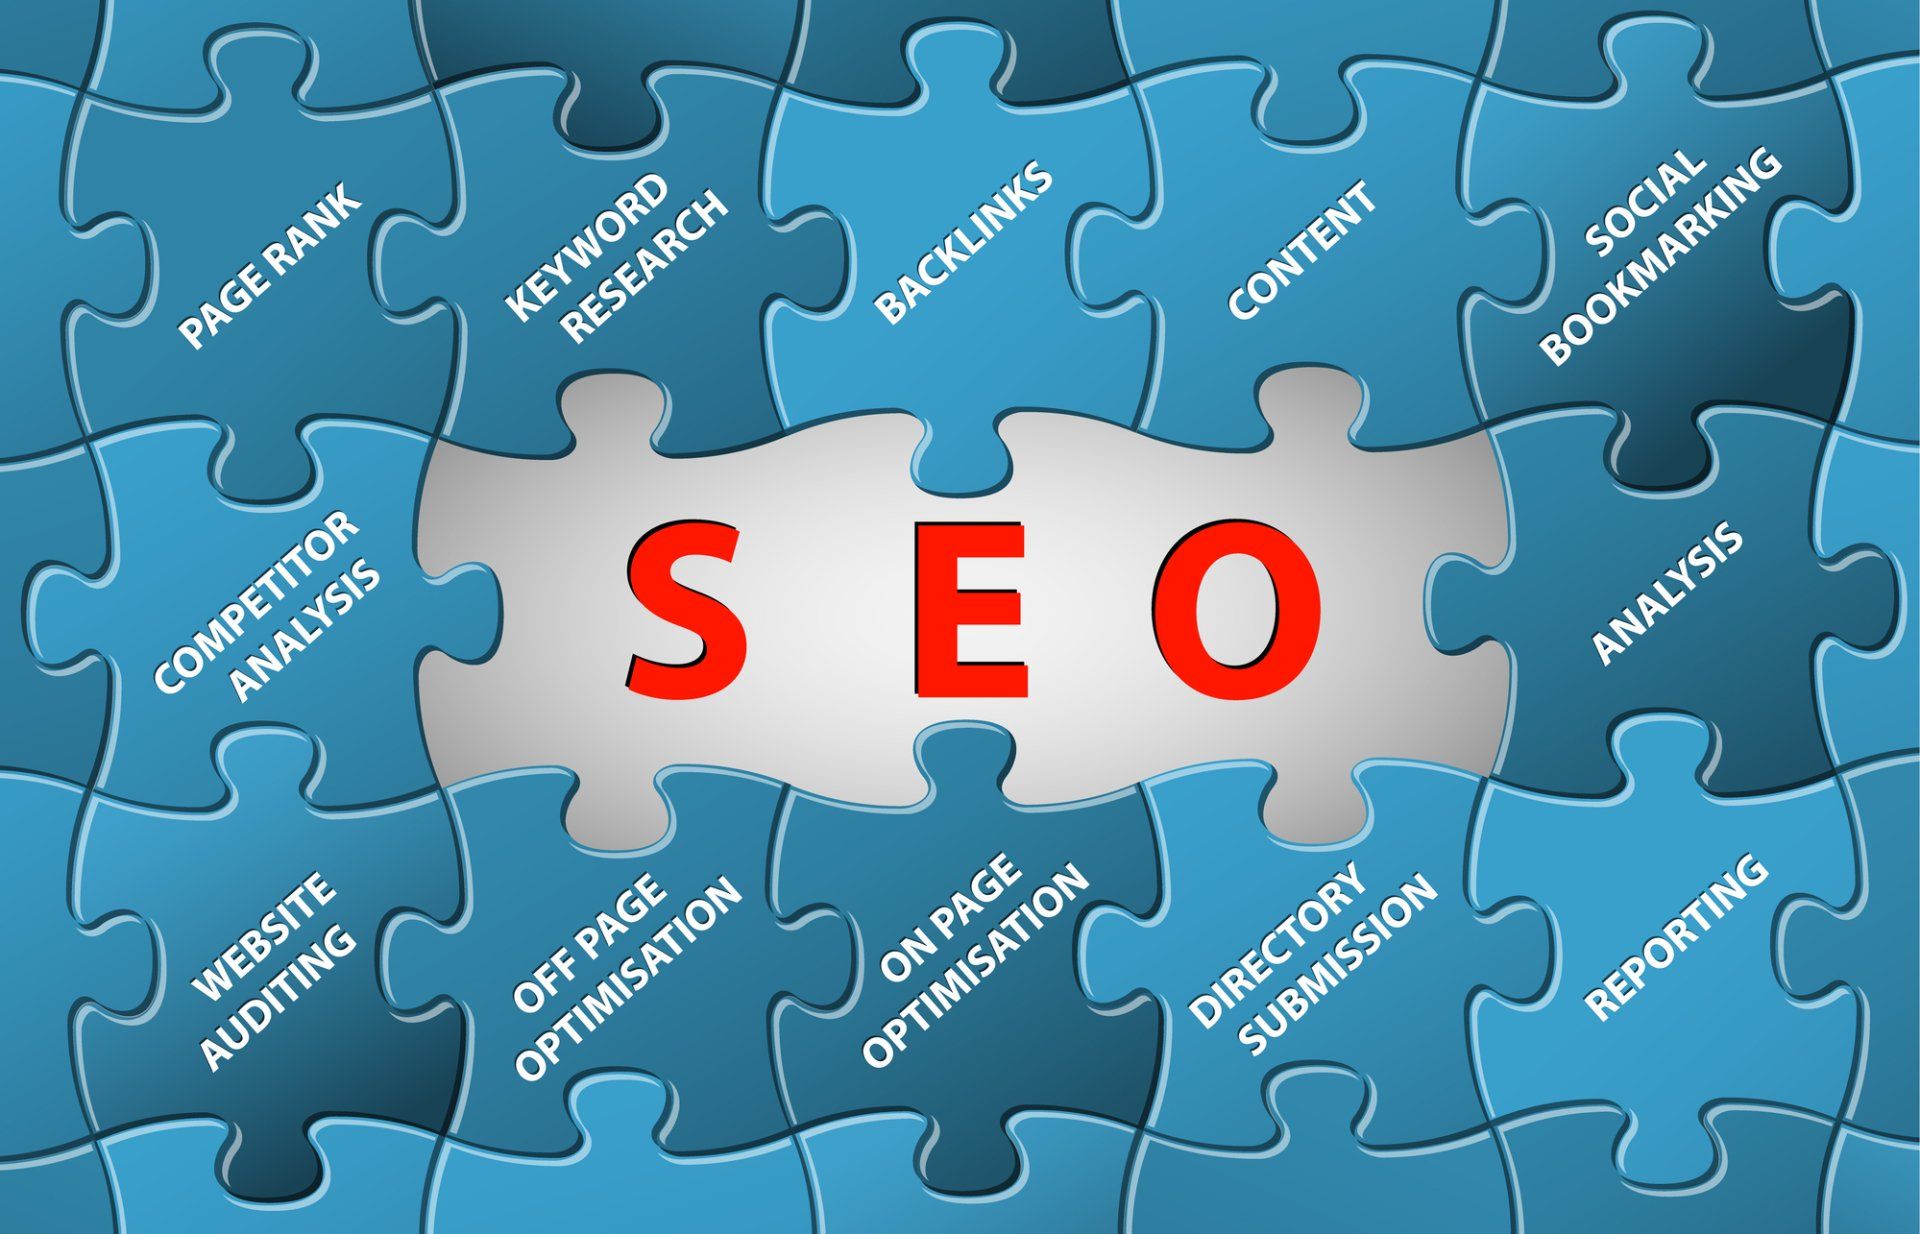 What Does SEO Stand for Anyway